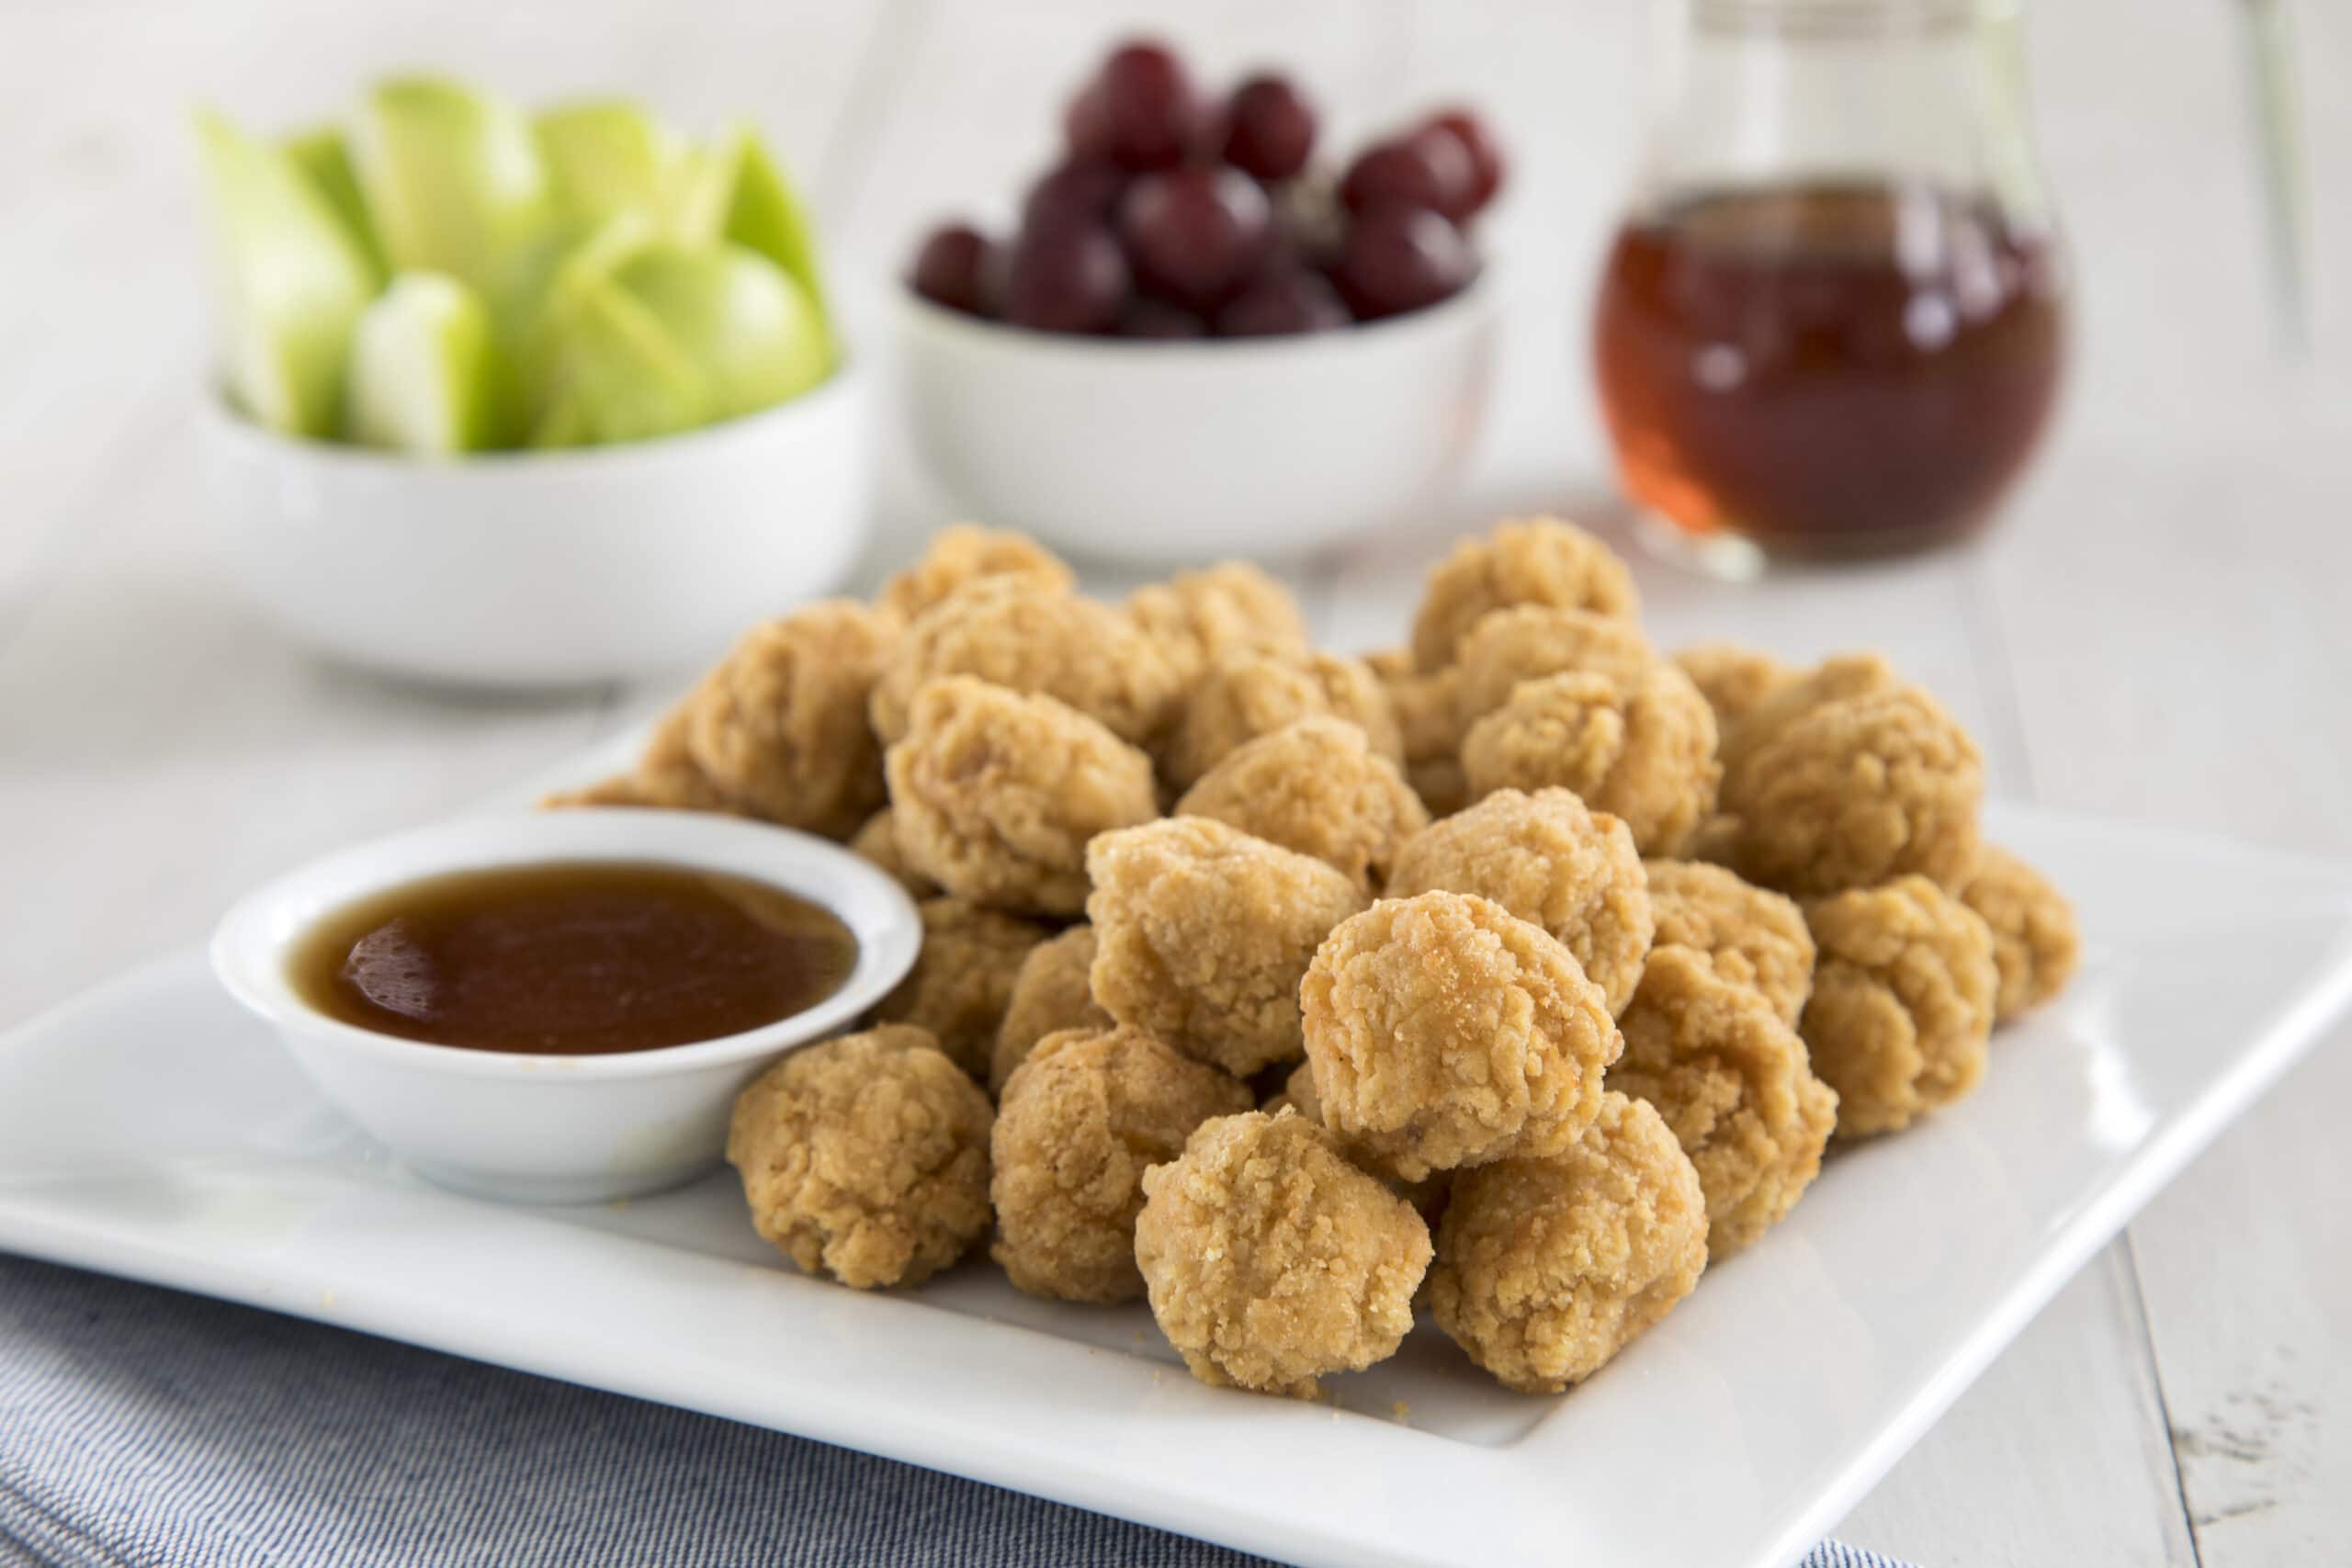 Plate of fried chicken nuggets with a dipping sauce, fruit in the background